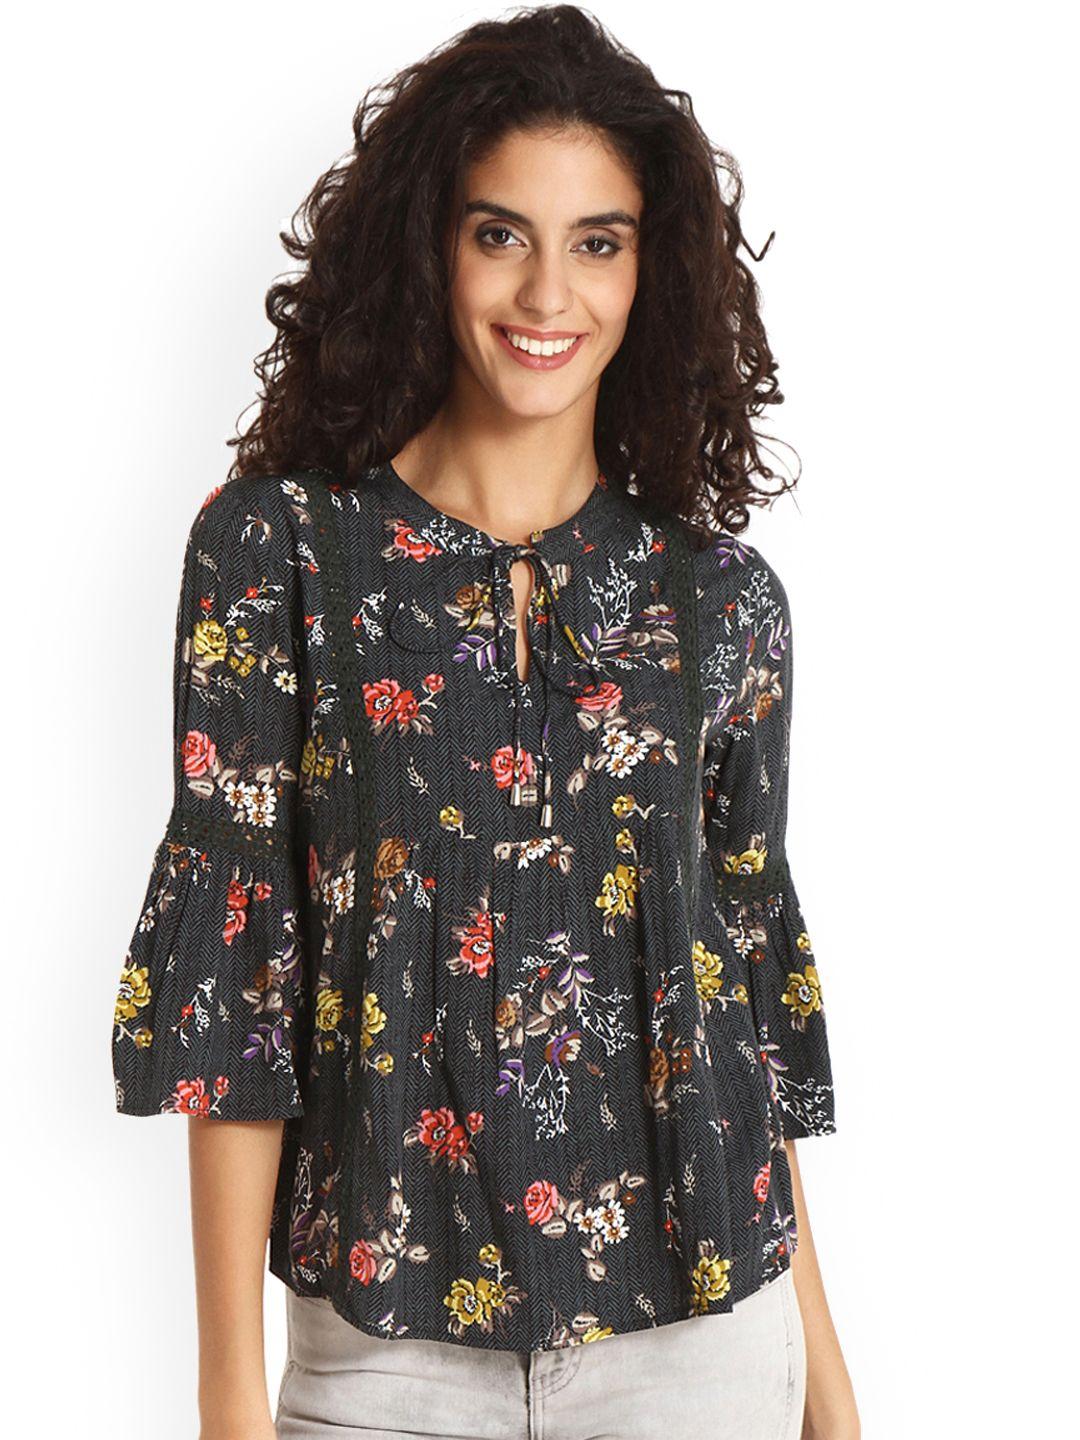 gipsy-women-charcoal-grey-floral-print-top